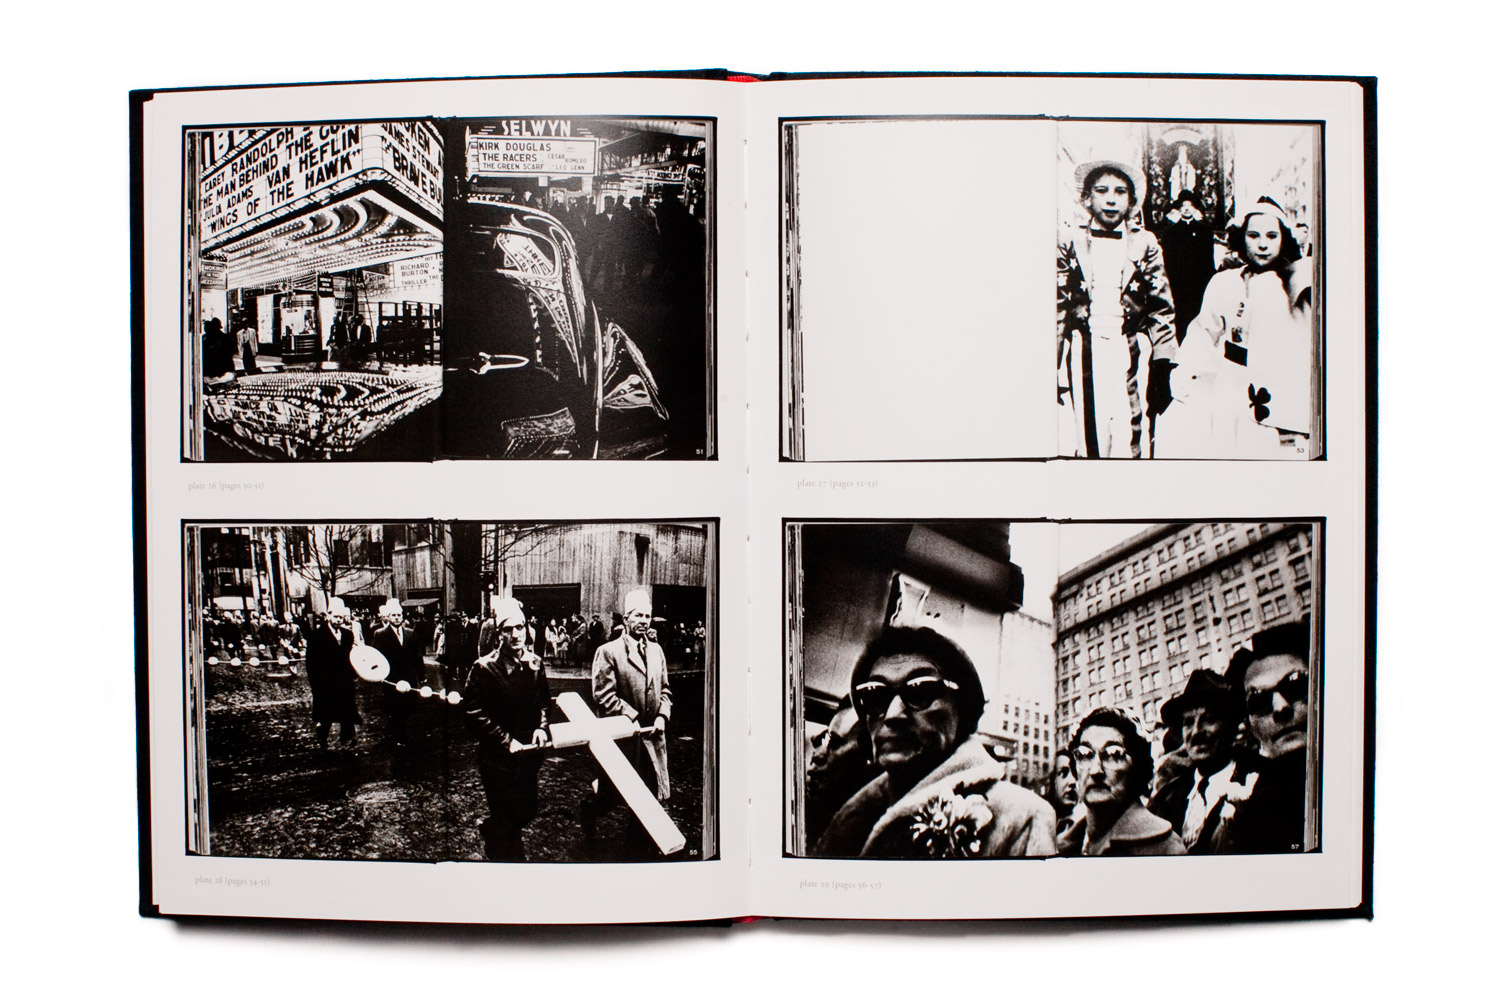 The effect of the multi-spread layouts exaggerates the dynamic energy of the original edition.